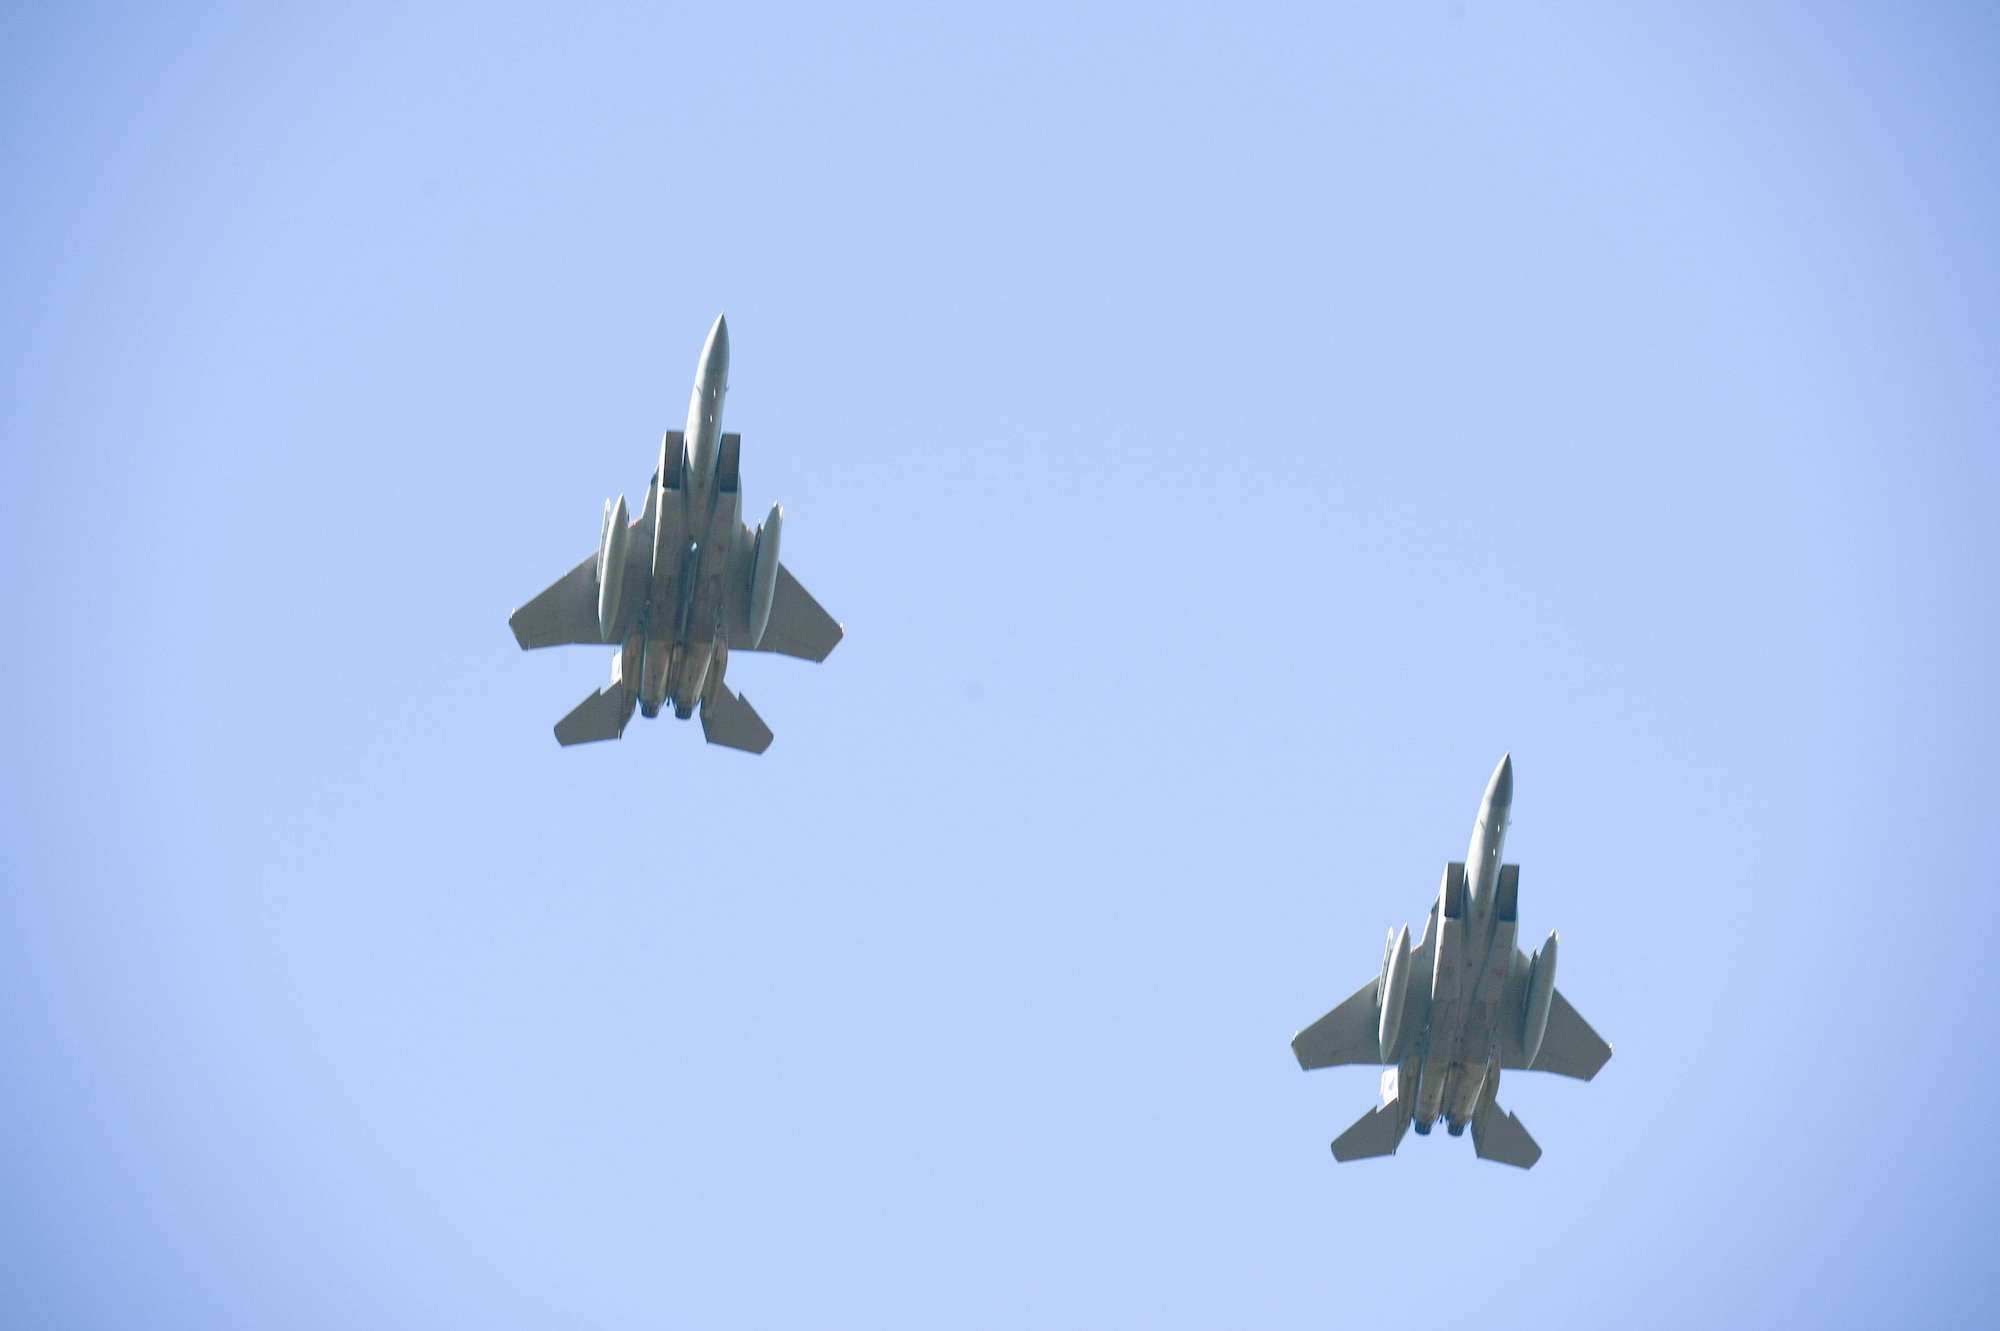 Two F-15s from the 142nd Fighter Wing, Oregon Air National Guard, fly over the Western Air Defense Sector during the F-15 static display dedication ceremony Sept. 13. The WADS has been guarding America's skies in the same
building 24/7 since 1960 and regularly uses F-15 alert aircraft to perform its mission. (U.S. Air Force photo/Senior Airman Jacob Jimenez/released)